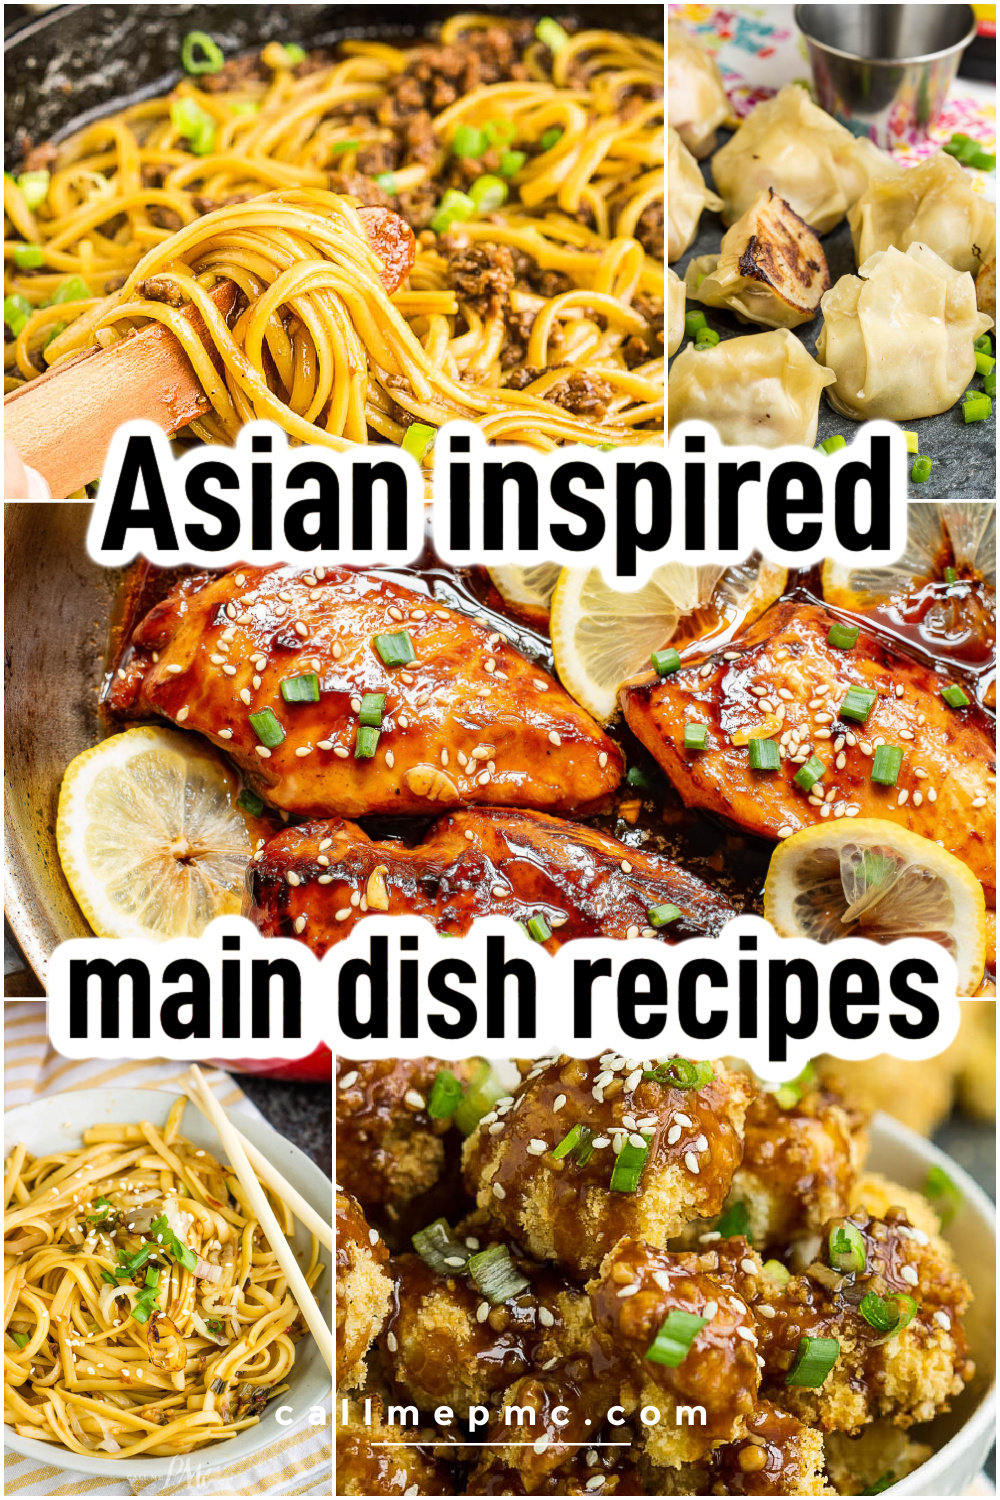 Asian-inspired Main Dish Recipes collage